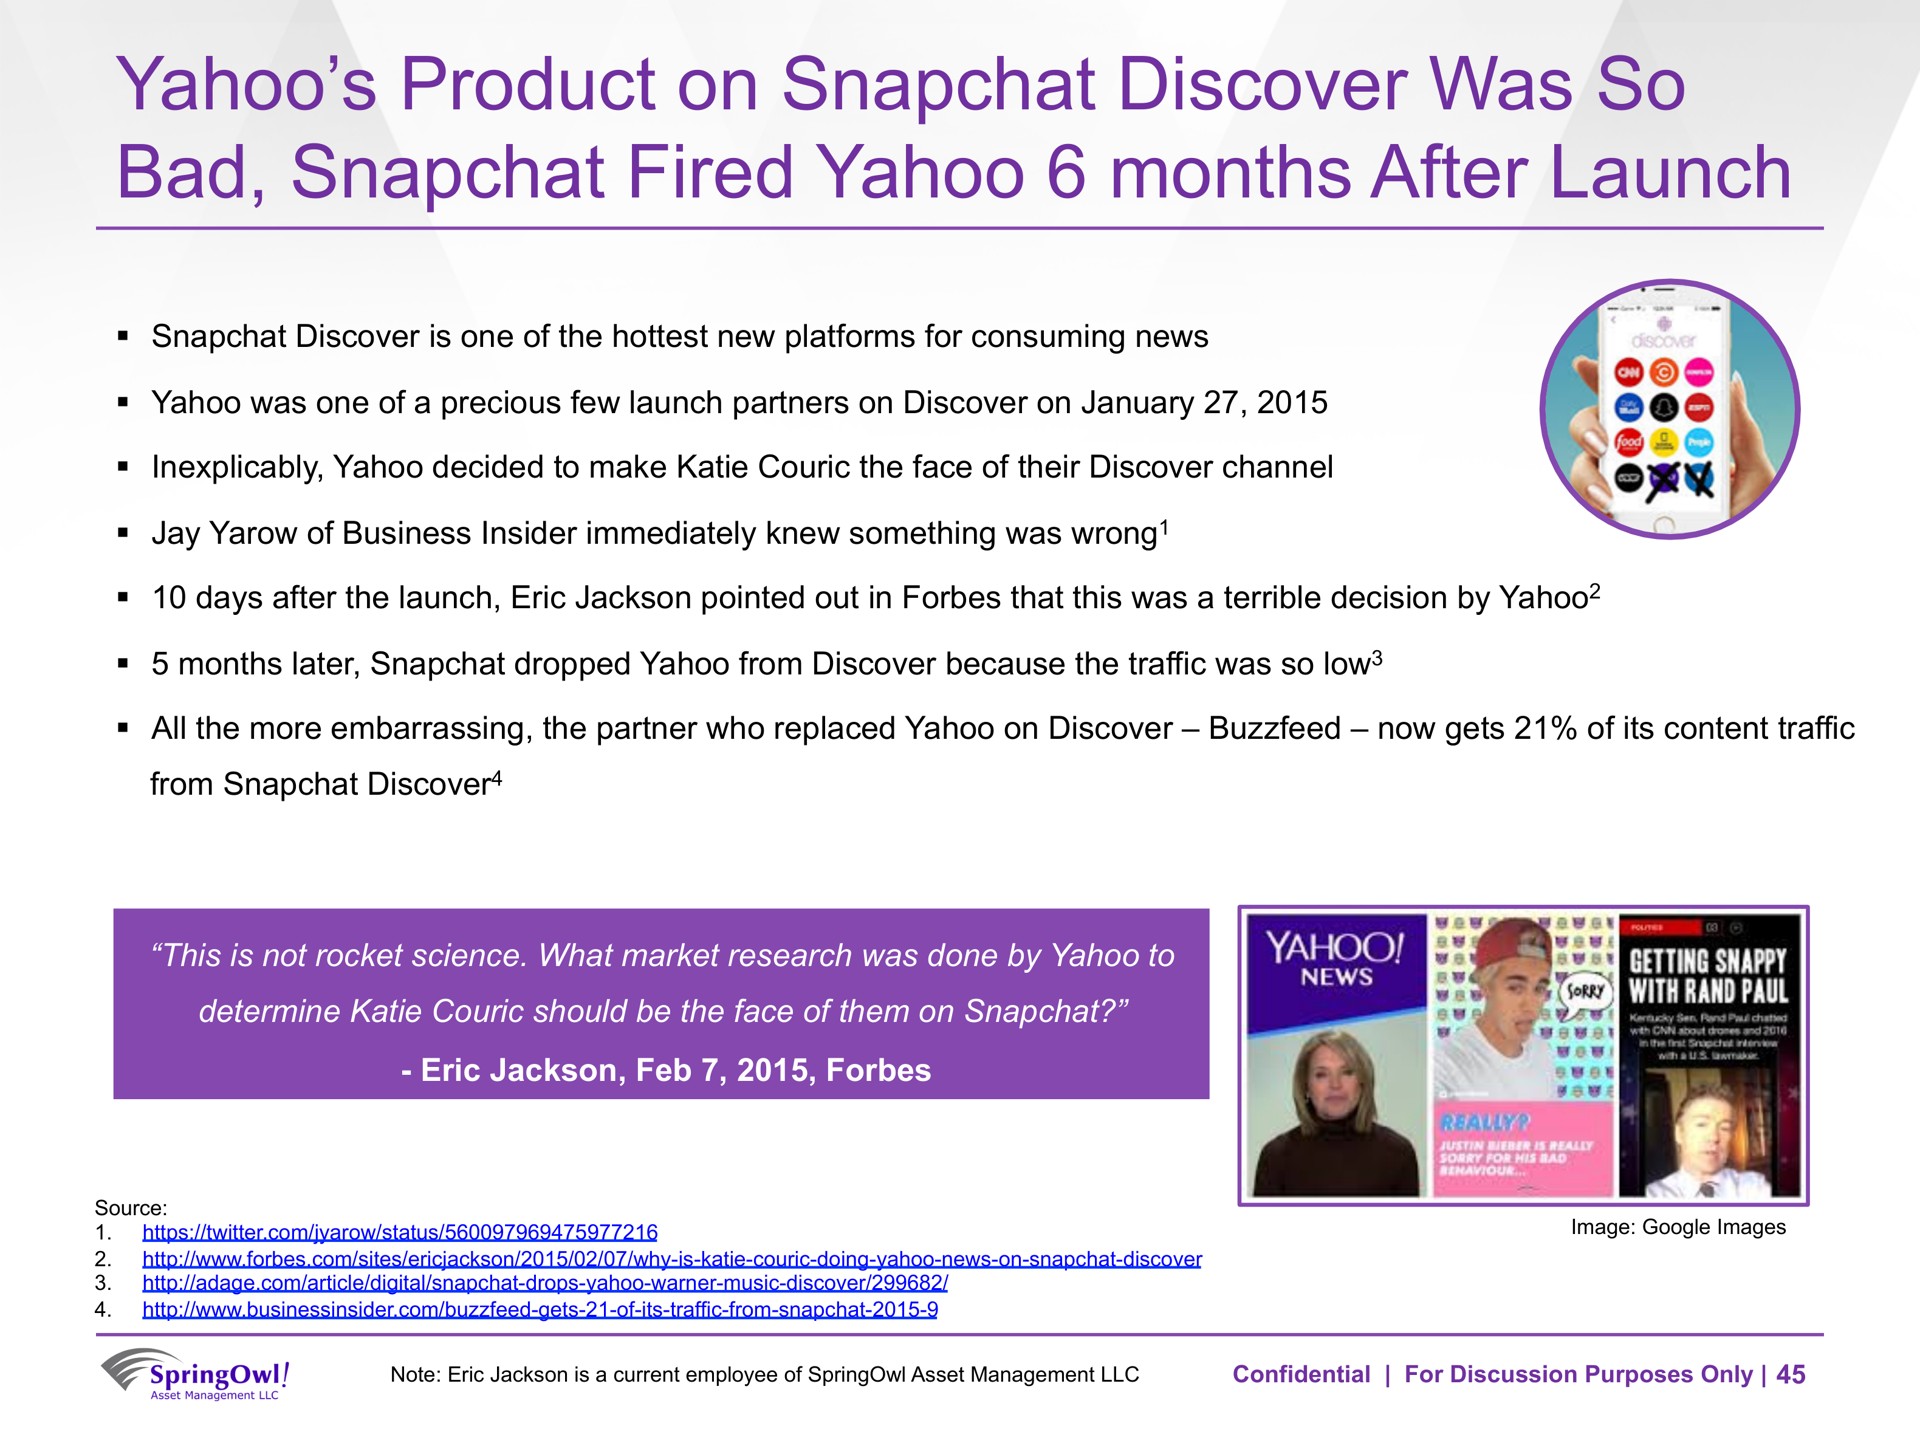 yahoo product on discover was so bad fired yahoo months after launch | SpringOwl